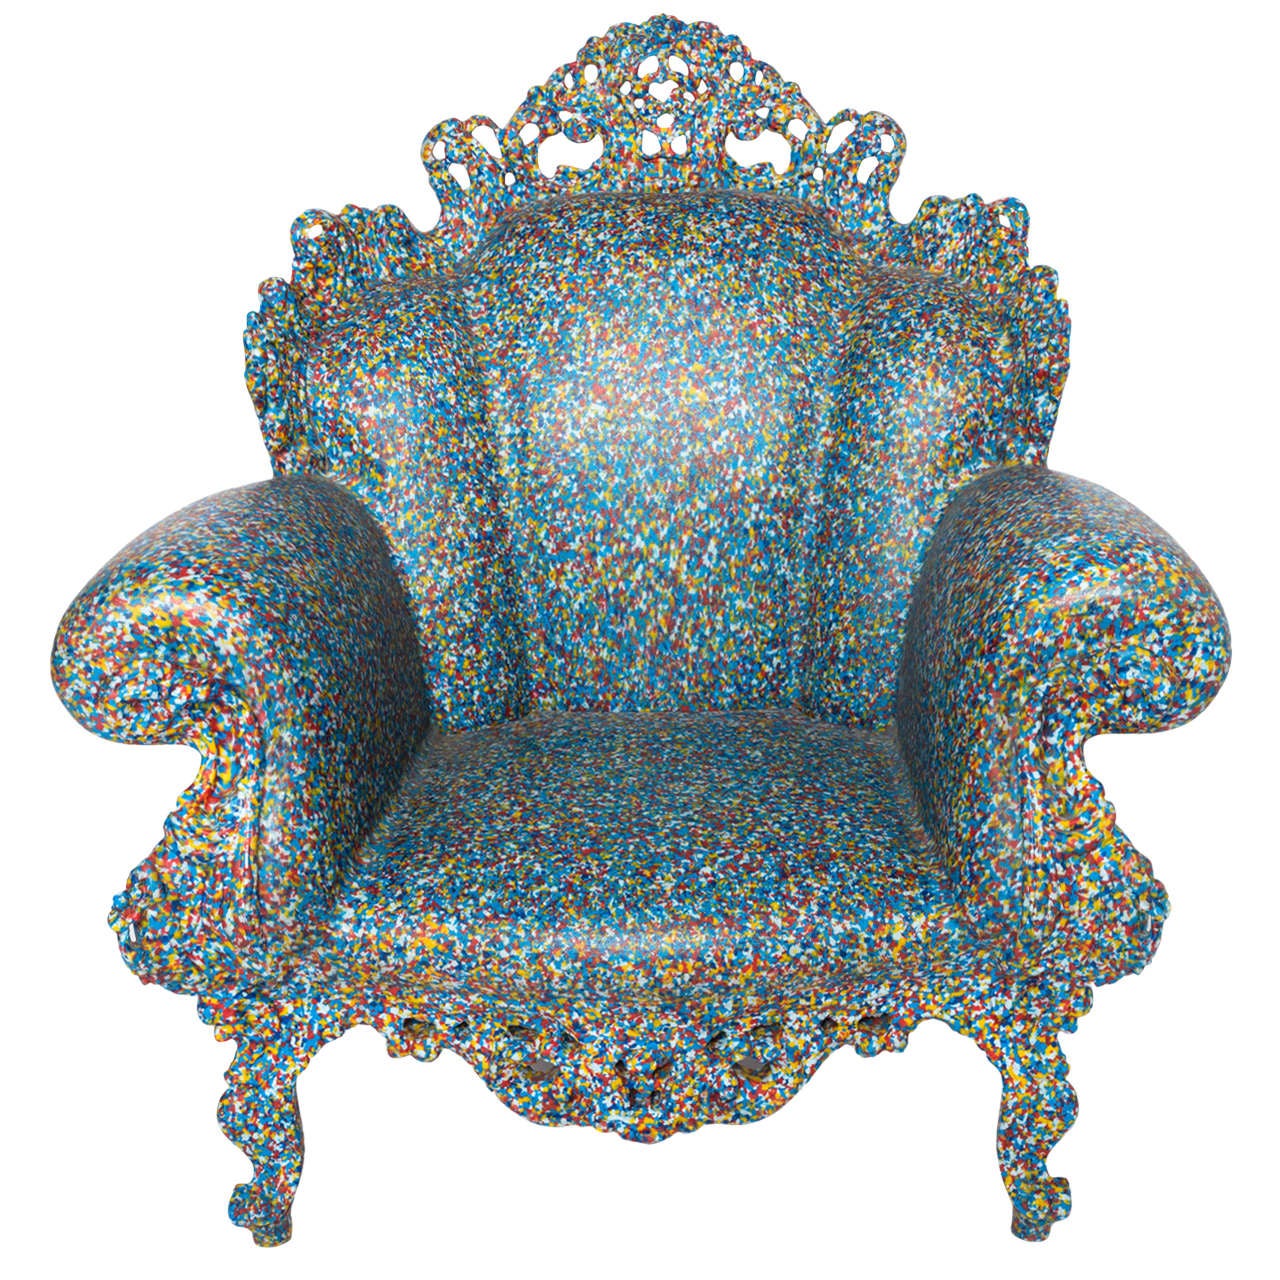 Alessandro Mendini Armchair "The Proust", Italy, 2011